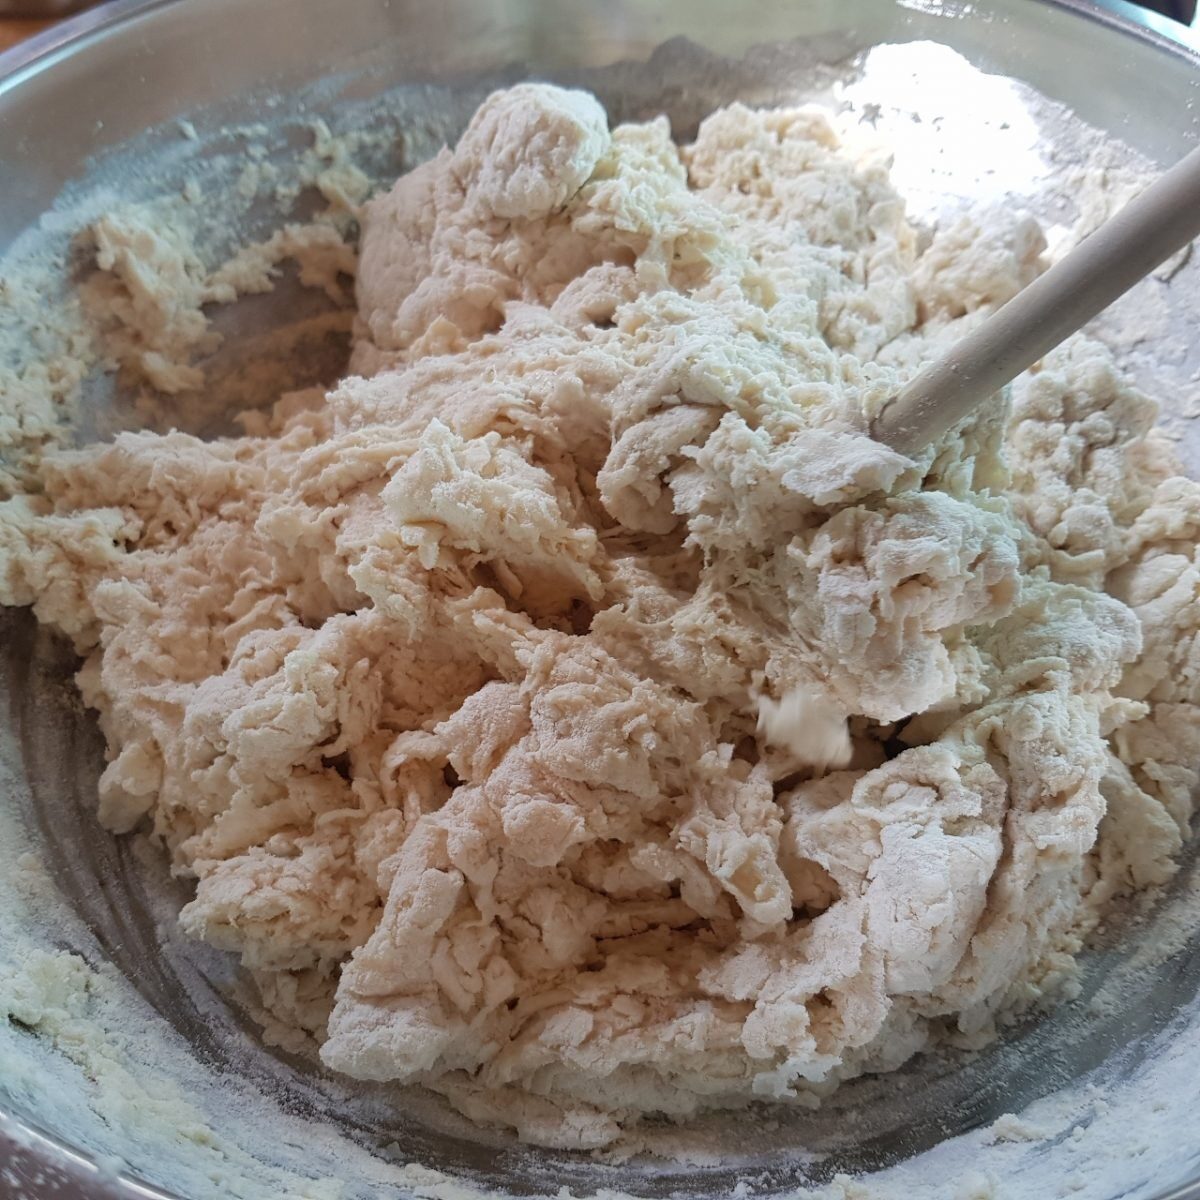 mix ingredients into a shaggy dough